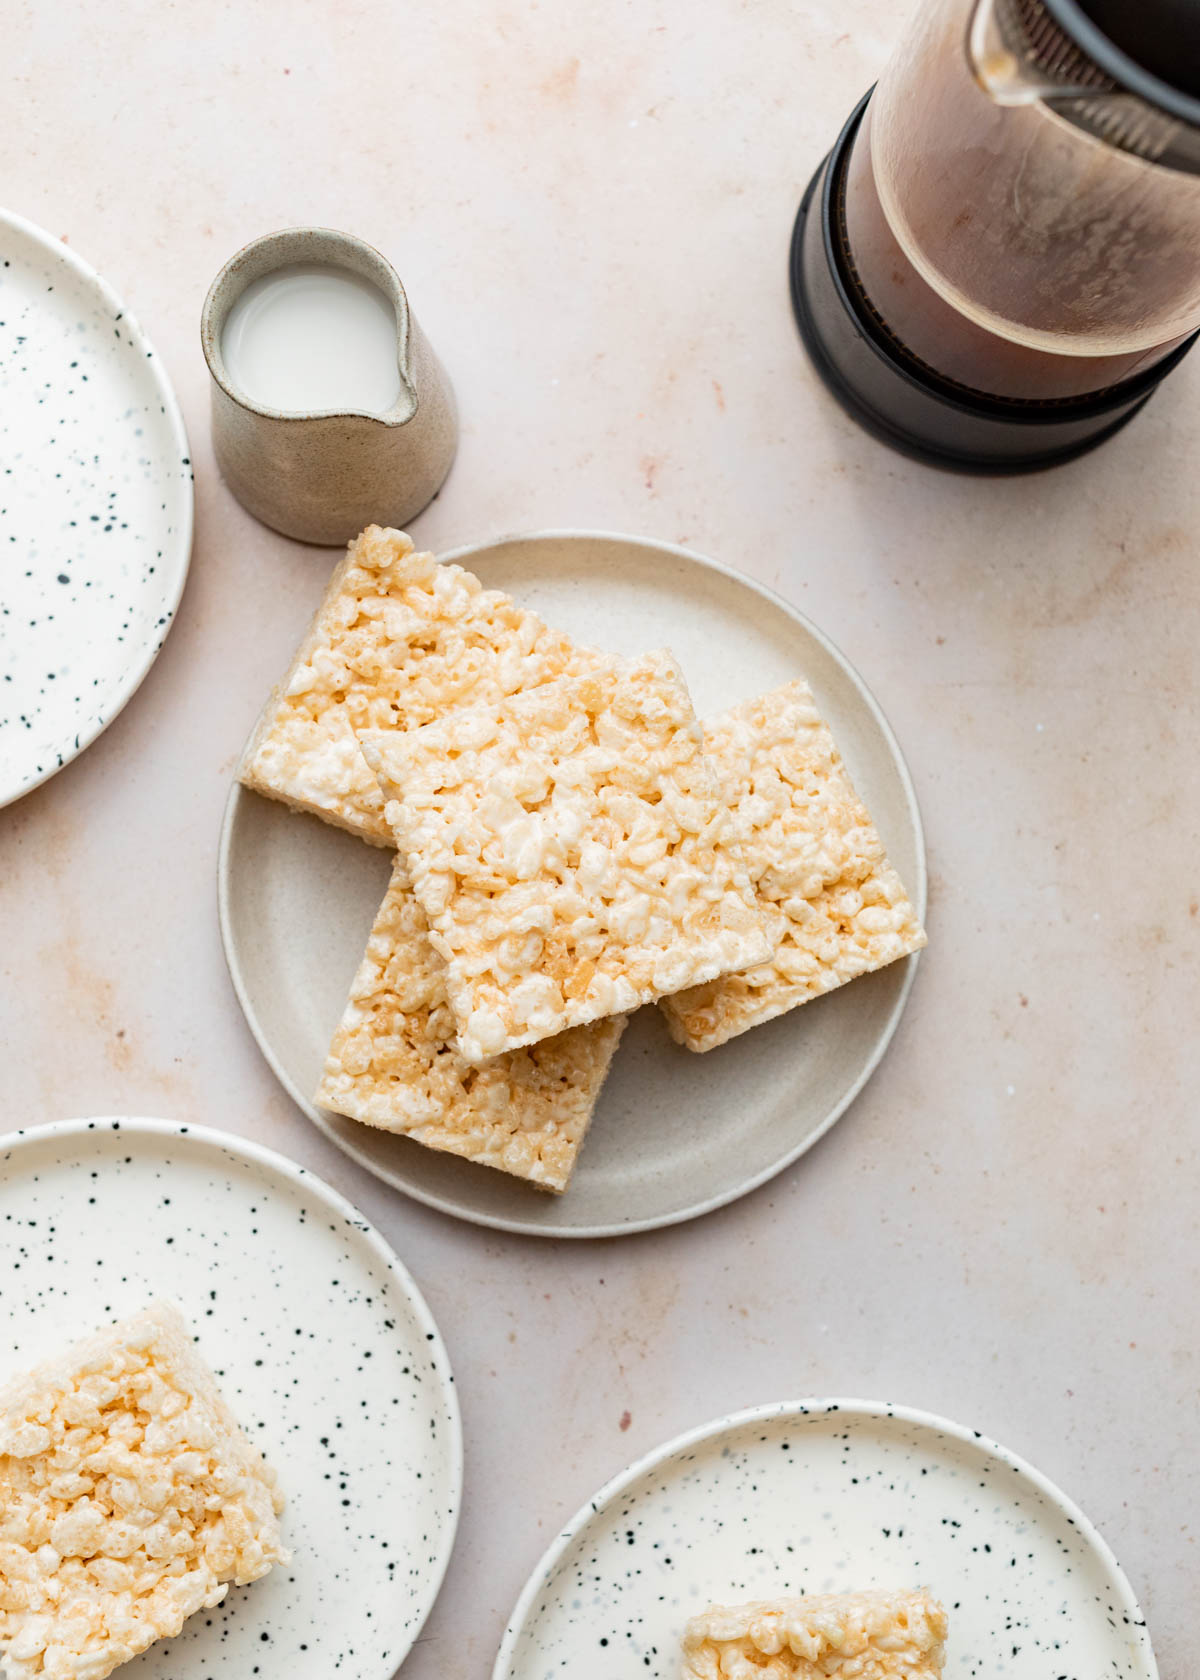 A stack of four Rice Krispie treats on a small plate with three other plates, a small pitcher of milk, and a carafe of coffee nearby.